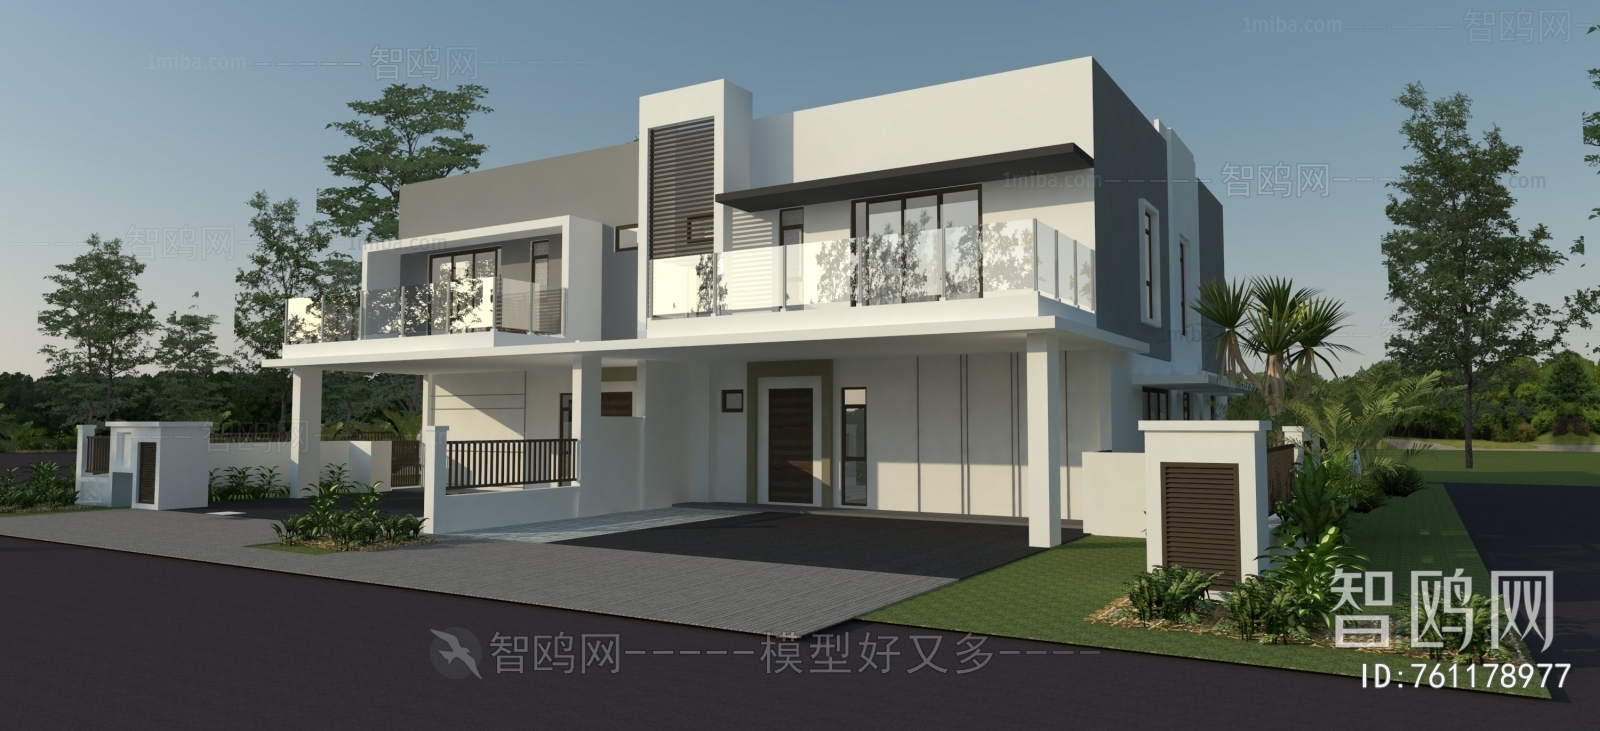 Modern Double Townhouse